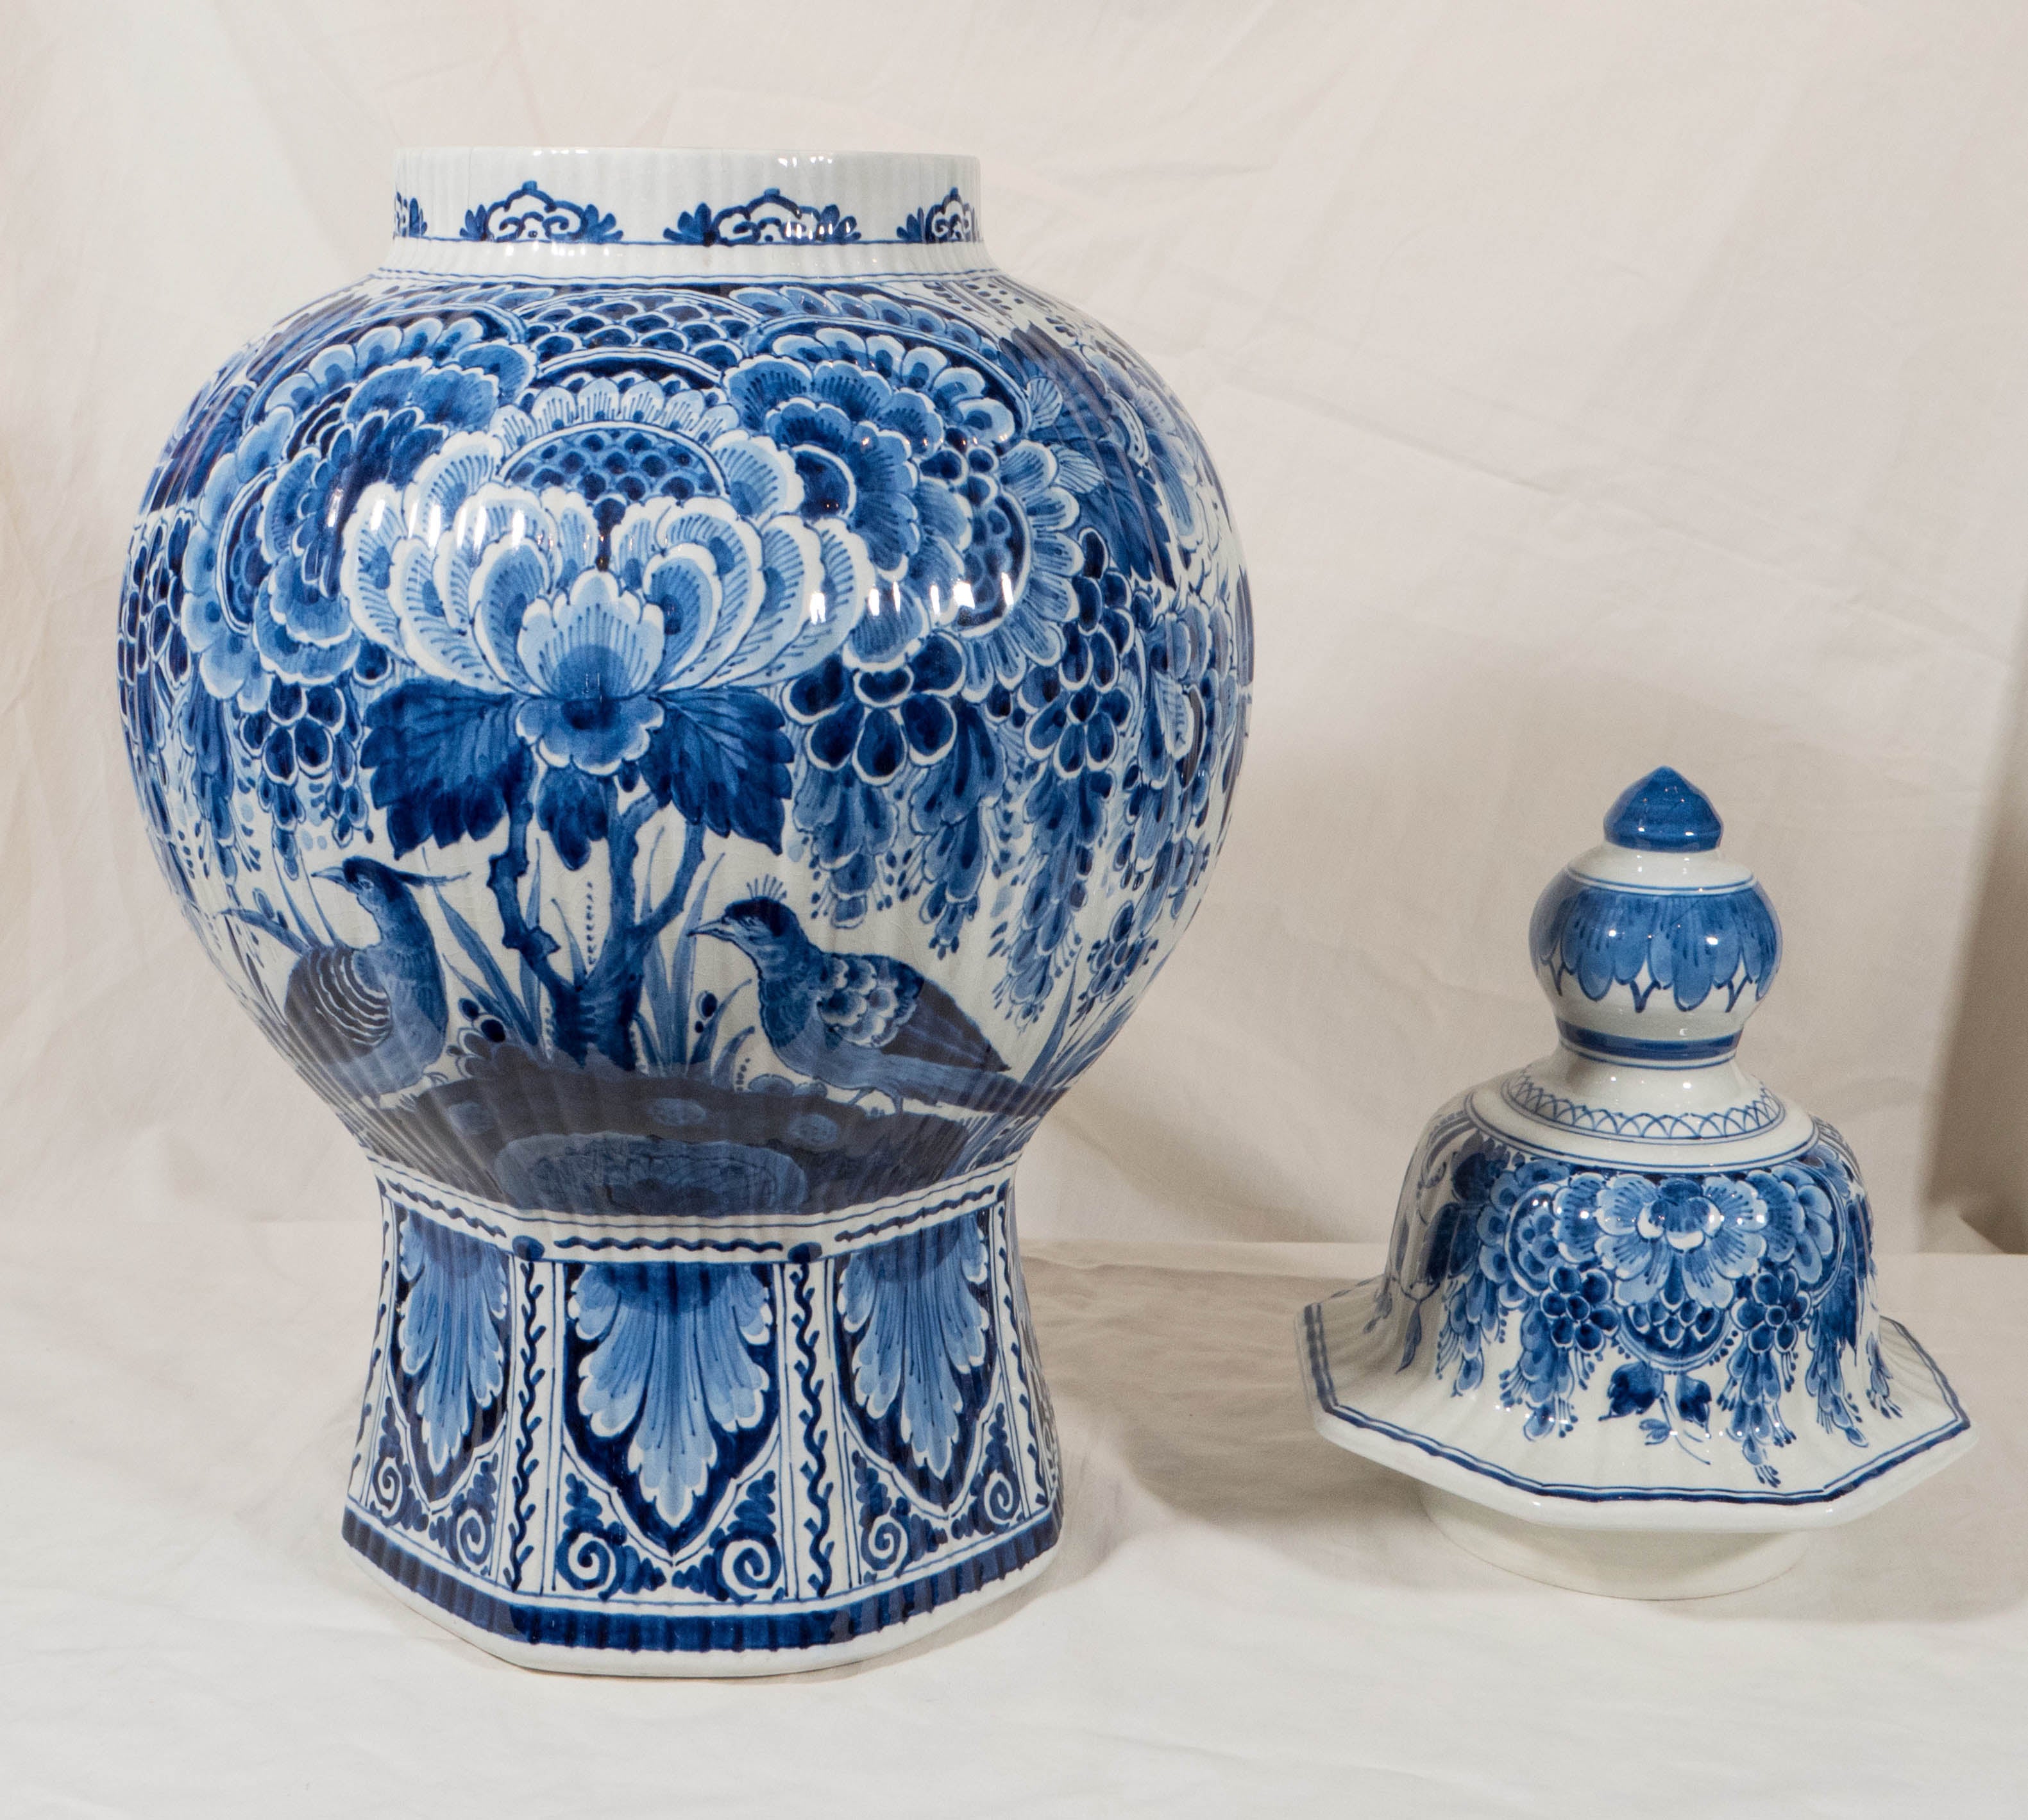 20th Century Pair of Large Dutch Delft Blue and White Covered Vases